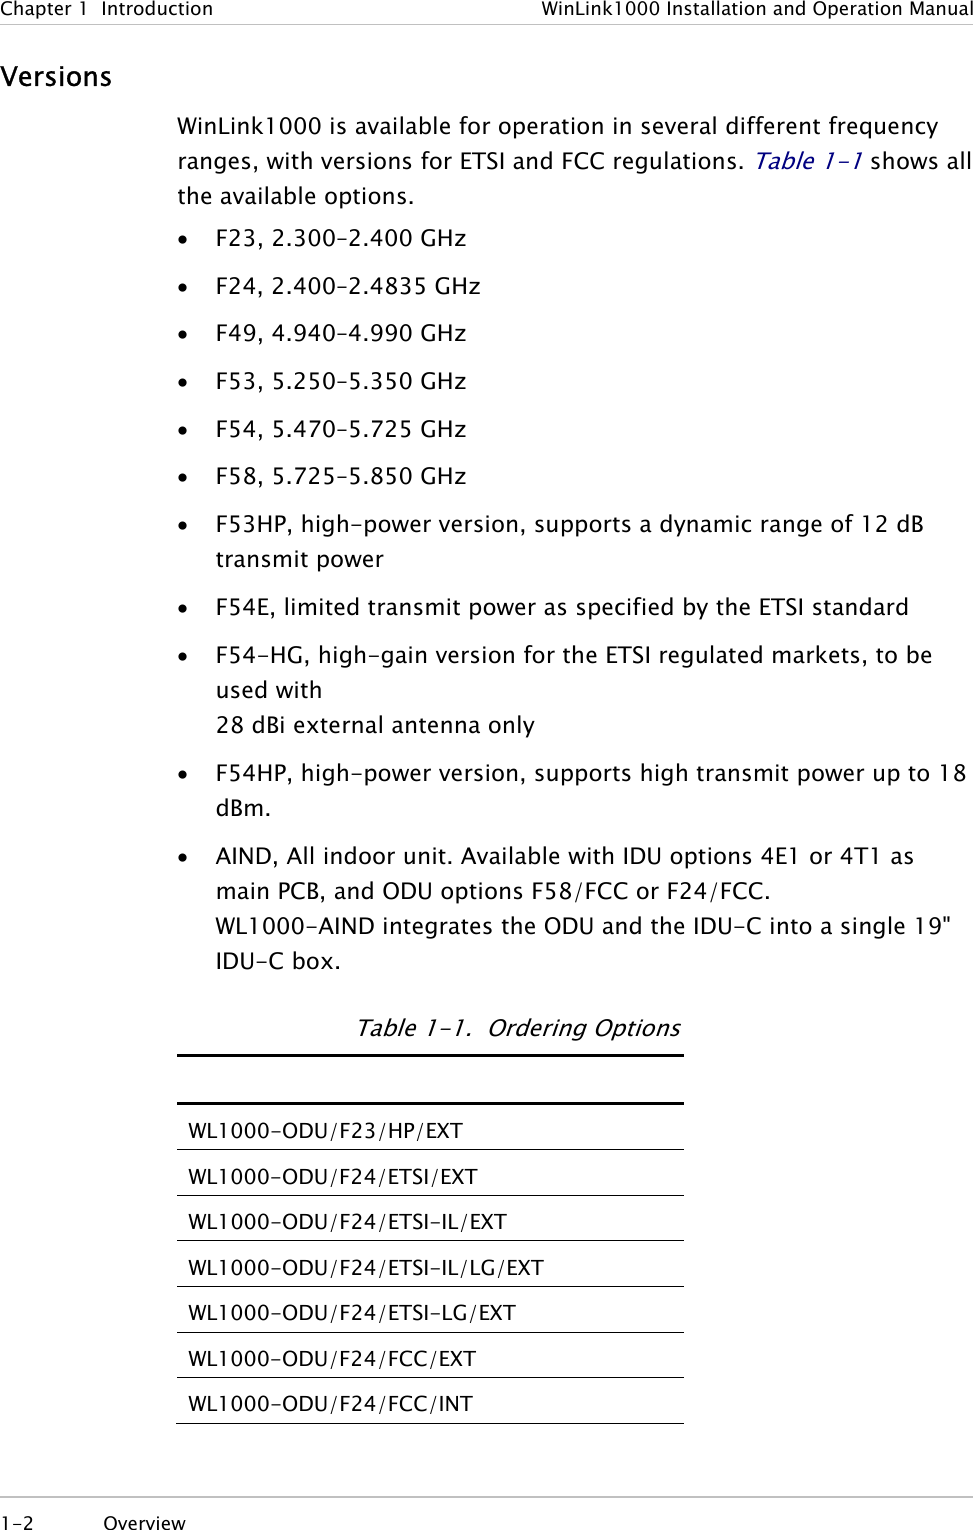 Chapter 1  Introduction  WinLink1000 Installation and Operation Manual Versions WinLink1000 is available for operation in several different frequency ranges, with versions for ETSI and FCC regulations. Table  1-1 shows all the available options. • F23, 2.300–2.400 GHz • F24, 2.400–2.4835 GHz • F49, 4.940–4.990 GHz • F53, 5.250–5.350 GHz • F54, 5.470–5.725 GHz • F58, 5.725–5.850 GHz • F53HP, high-power version, supports a dynamic range of 12 dB transmit power  • F54E, limited transmit power as specified by the ETSI standard • F54-HG, high-gain version for the ETSI regulated markets, to be used with  28 dBi external antenna only • F54HP, high-power version, supports high transmit power up to 18 dBm. • AIND, All indoor unit. Available with IDU options 4E1 or 4T1 as main PCB, and ODU options F58/FCC or F24/FCC. WL1000-AIND integrates the ODU and the IDU-C into a single 19&quot; IDU-C box. Table  1-1.  Ordering Options  WL1000-ODU/F23/HP/EXT WL1000-ODU/F24/ETSI/EXT WL1000-ODU/F24/ETSI-IL/EXT WL1000-ODU/F24/ETSI-IL/LG/EXT WL1000-ODU/F24/ETSI-LG/EXT WL1000-ODU/F24/FCC/EXT WL1000-ODU/F24/FCC/INT 1-2 Overview  